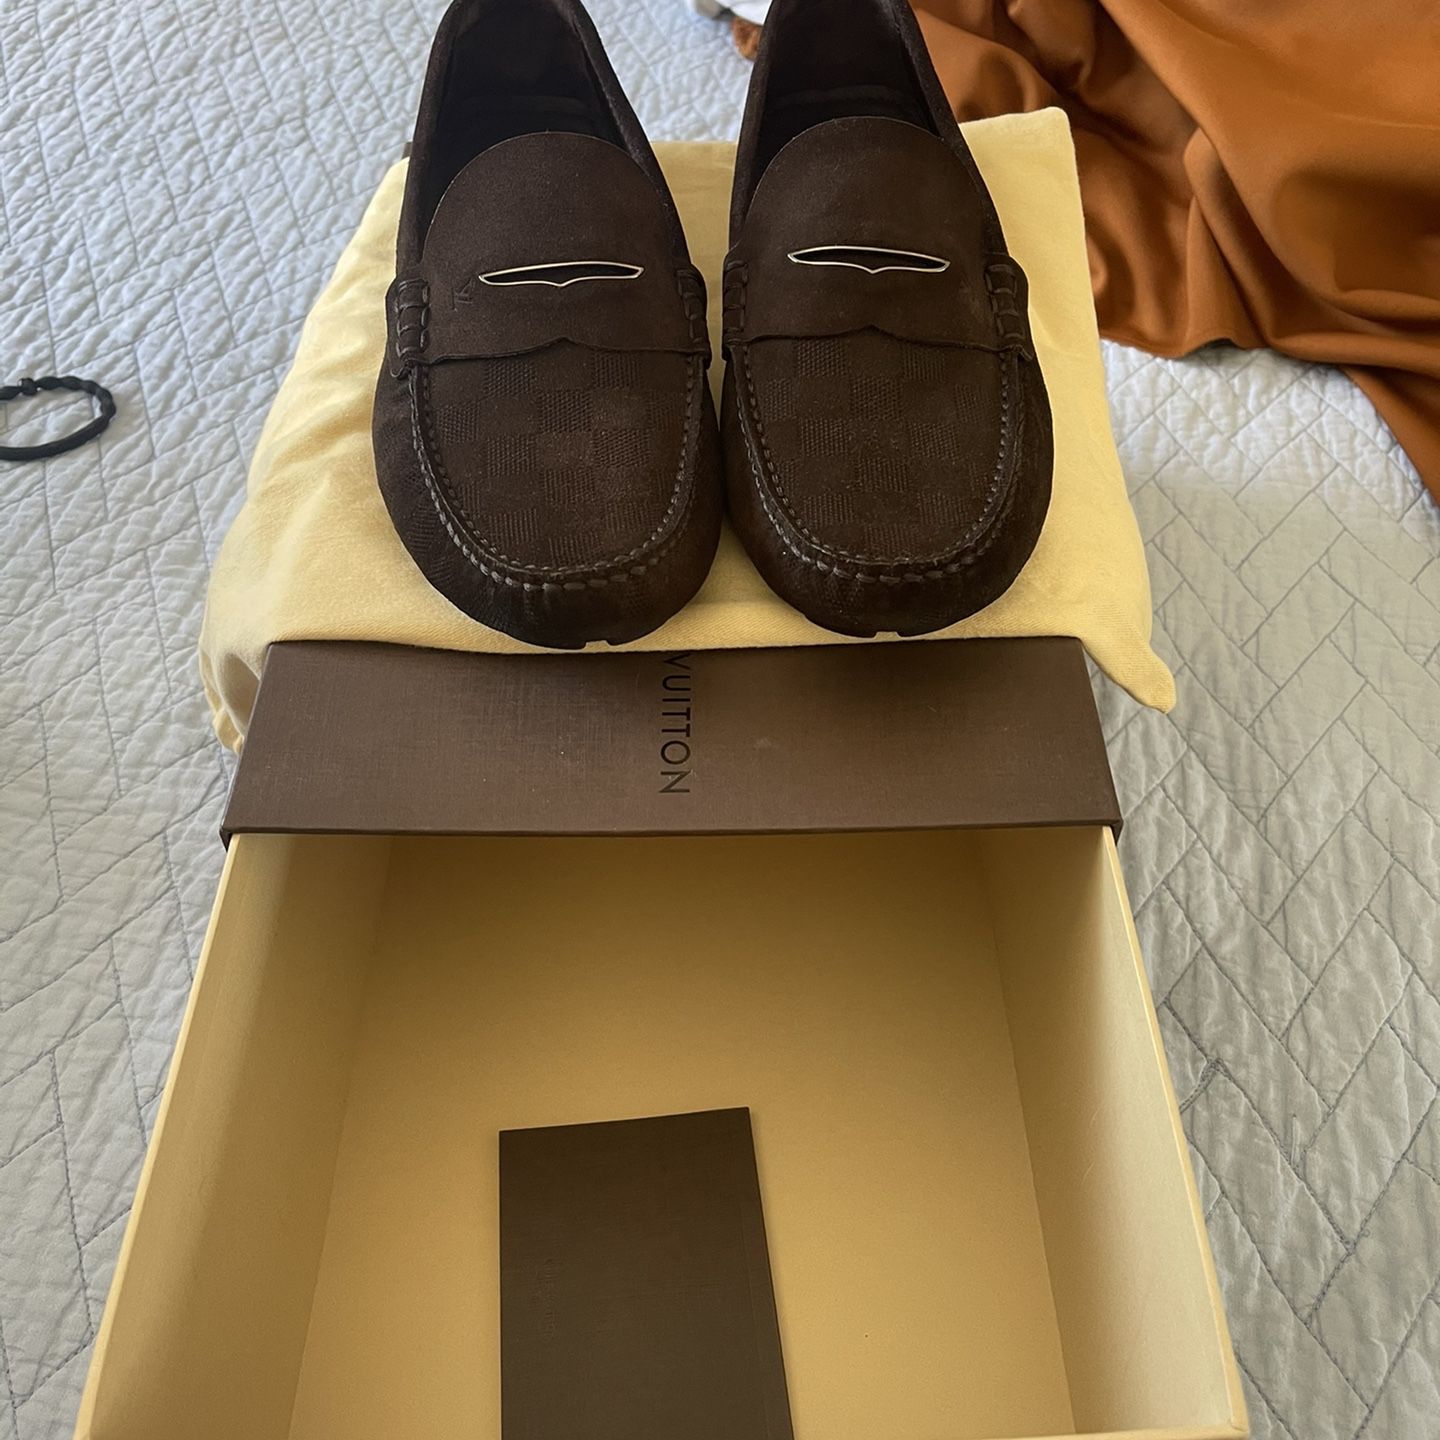 Louis Vuitton Men Loafers for Sale in Lake View Terrace, CA - OfferUp